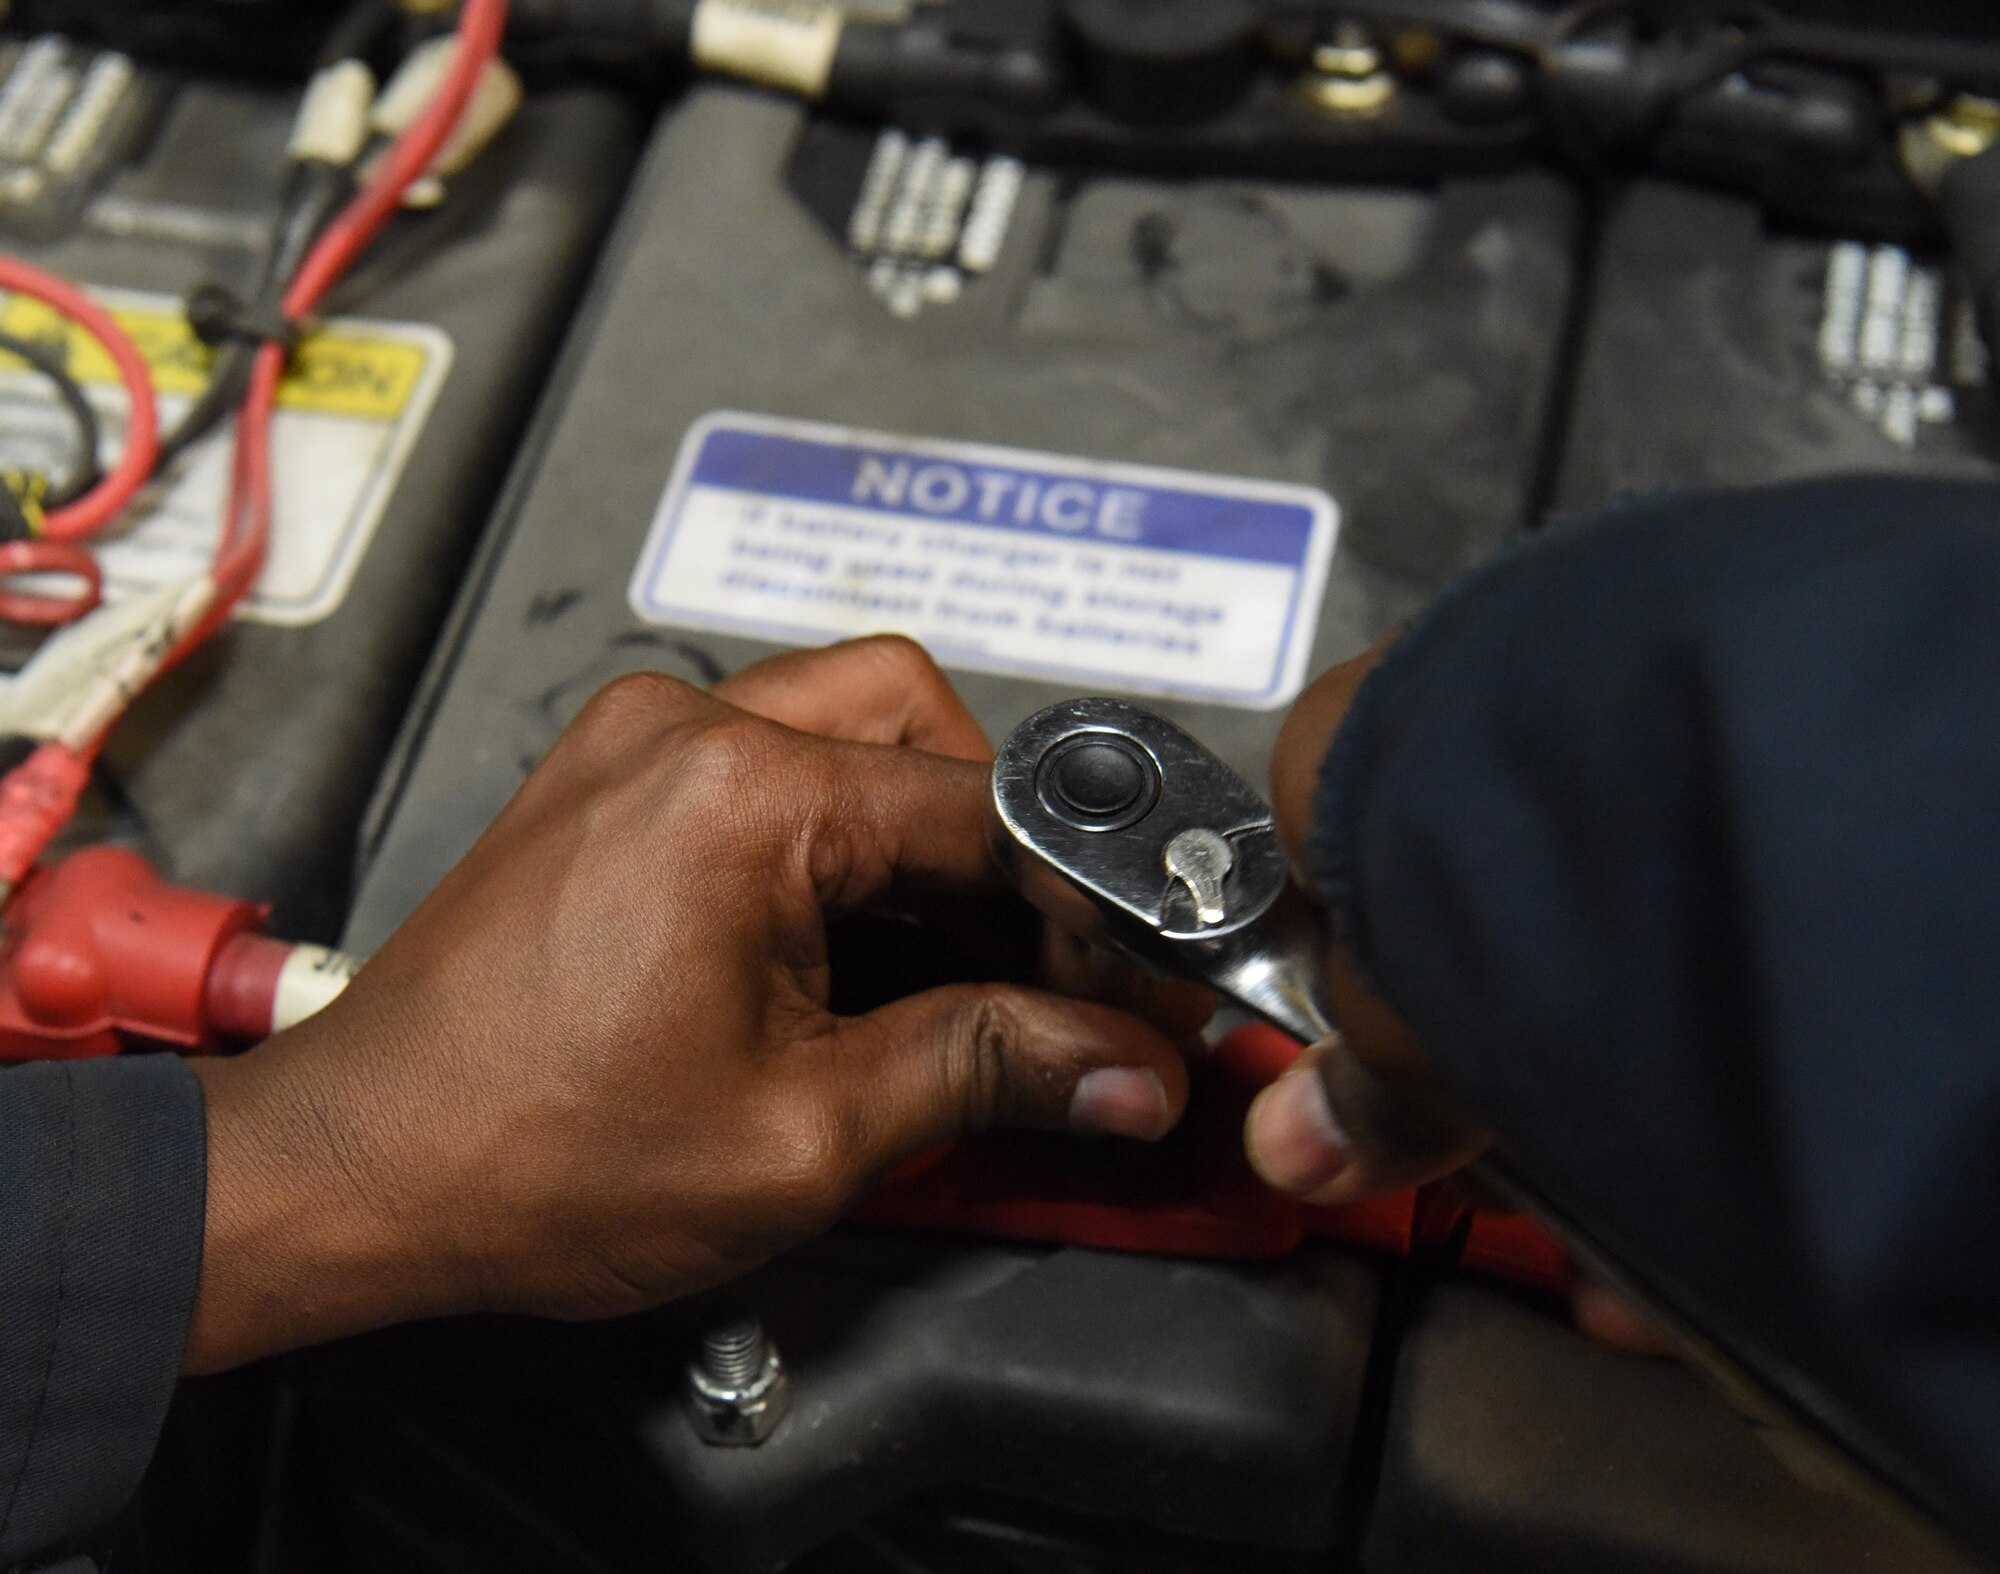 Airman 1st Class Victor Gathara, a 28th Logistics Readiness Squadron vehicle maintenance technician, connects a wire to a battery on a snow removal vehicle at Ellsworth Air Force Base, S.D., Aug. 9, 2018. Members of the 28th LRS vehicle maintenance shop perform a rebuild during the summer months on all the base’s snow fleet vehicles to ensure they are ready to operate effectively when winter arrives. (U.S. Air Force photo by Airman 1st Class Thomas Karol)